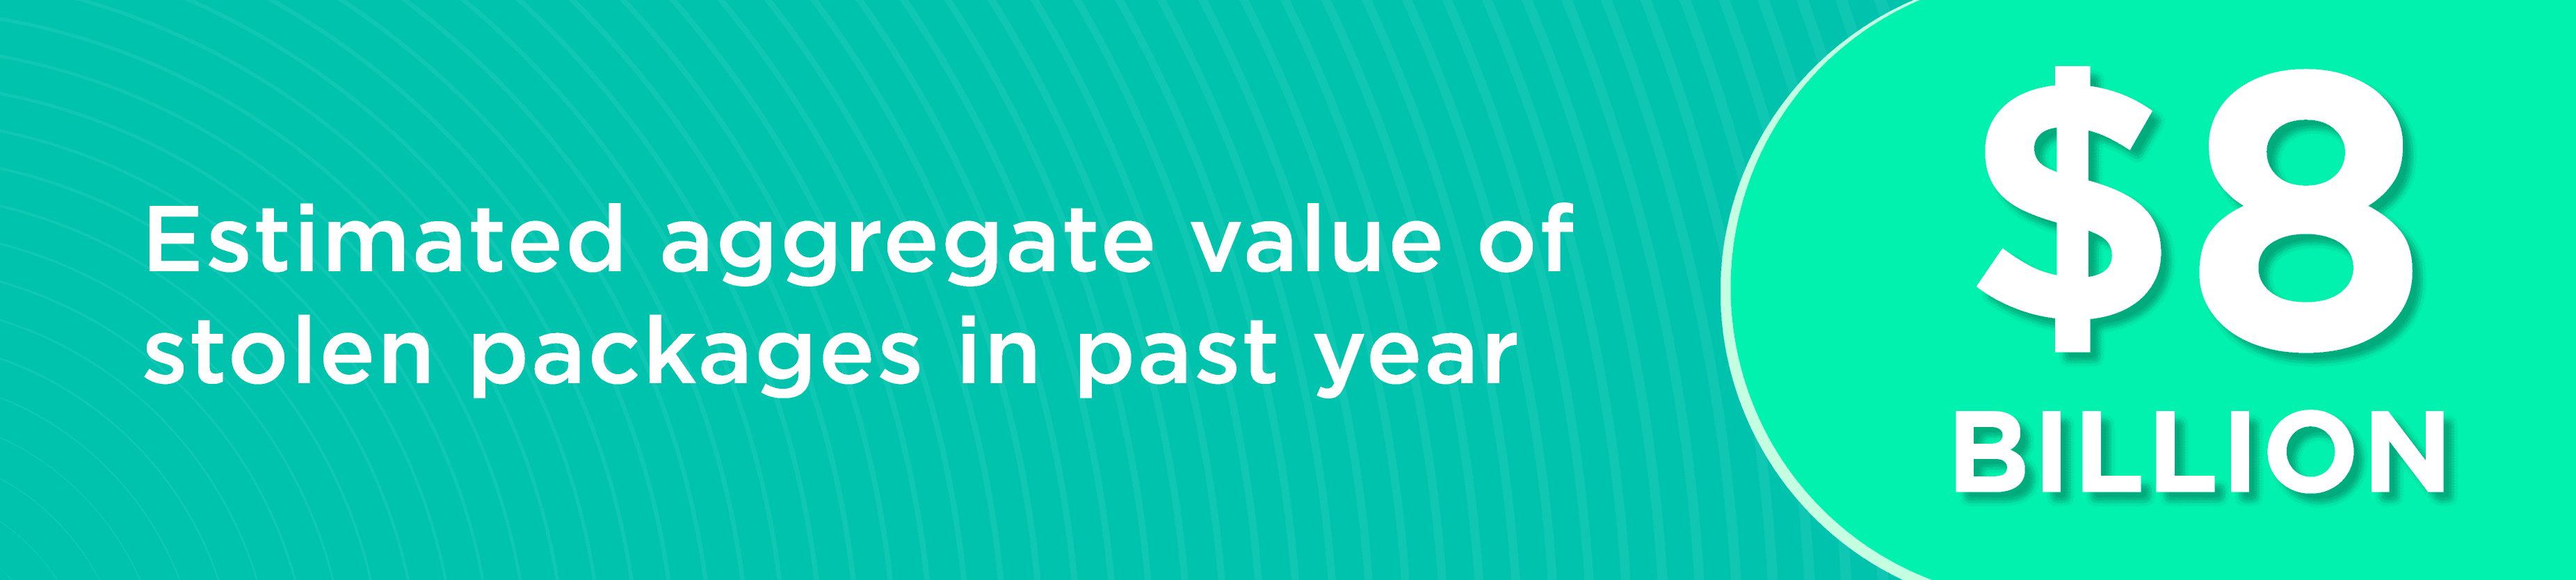 Estimated aggregate value of stolen package in the past year is $8 billion.